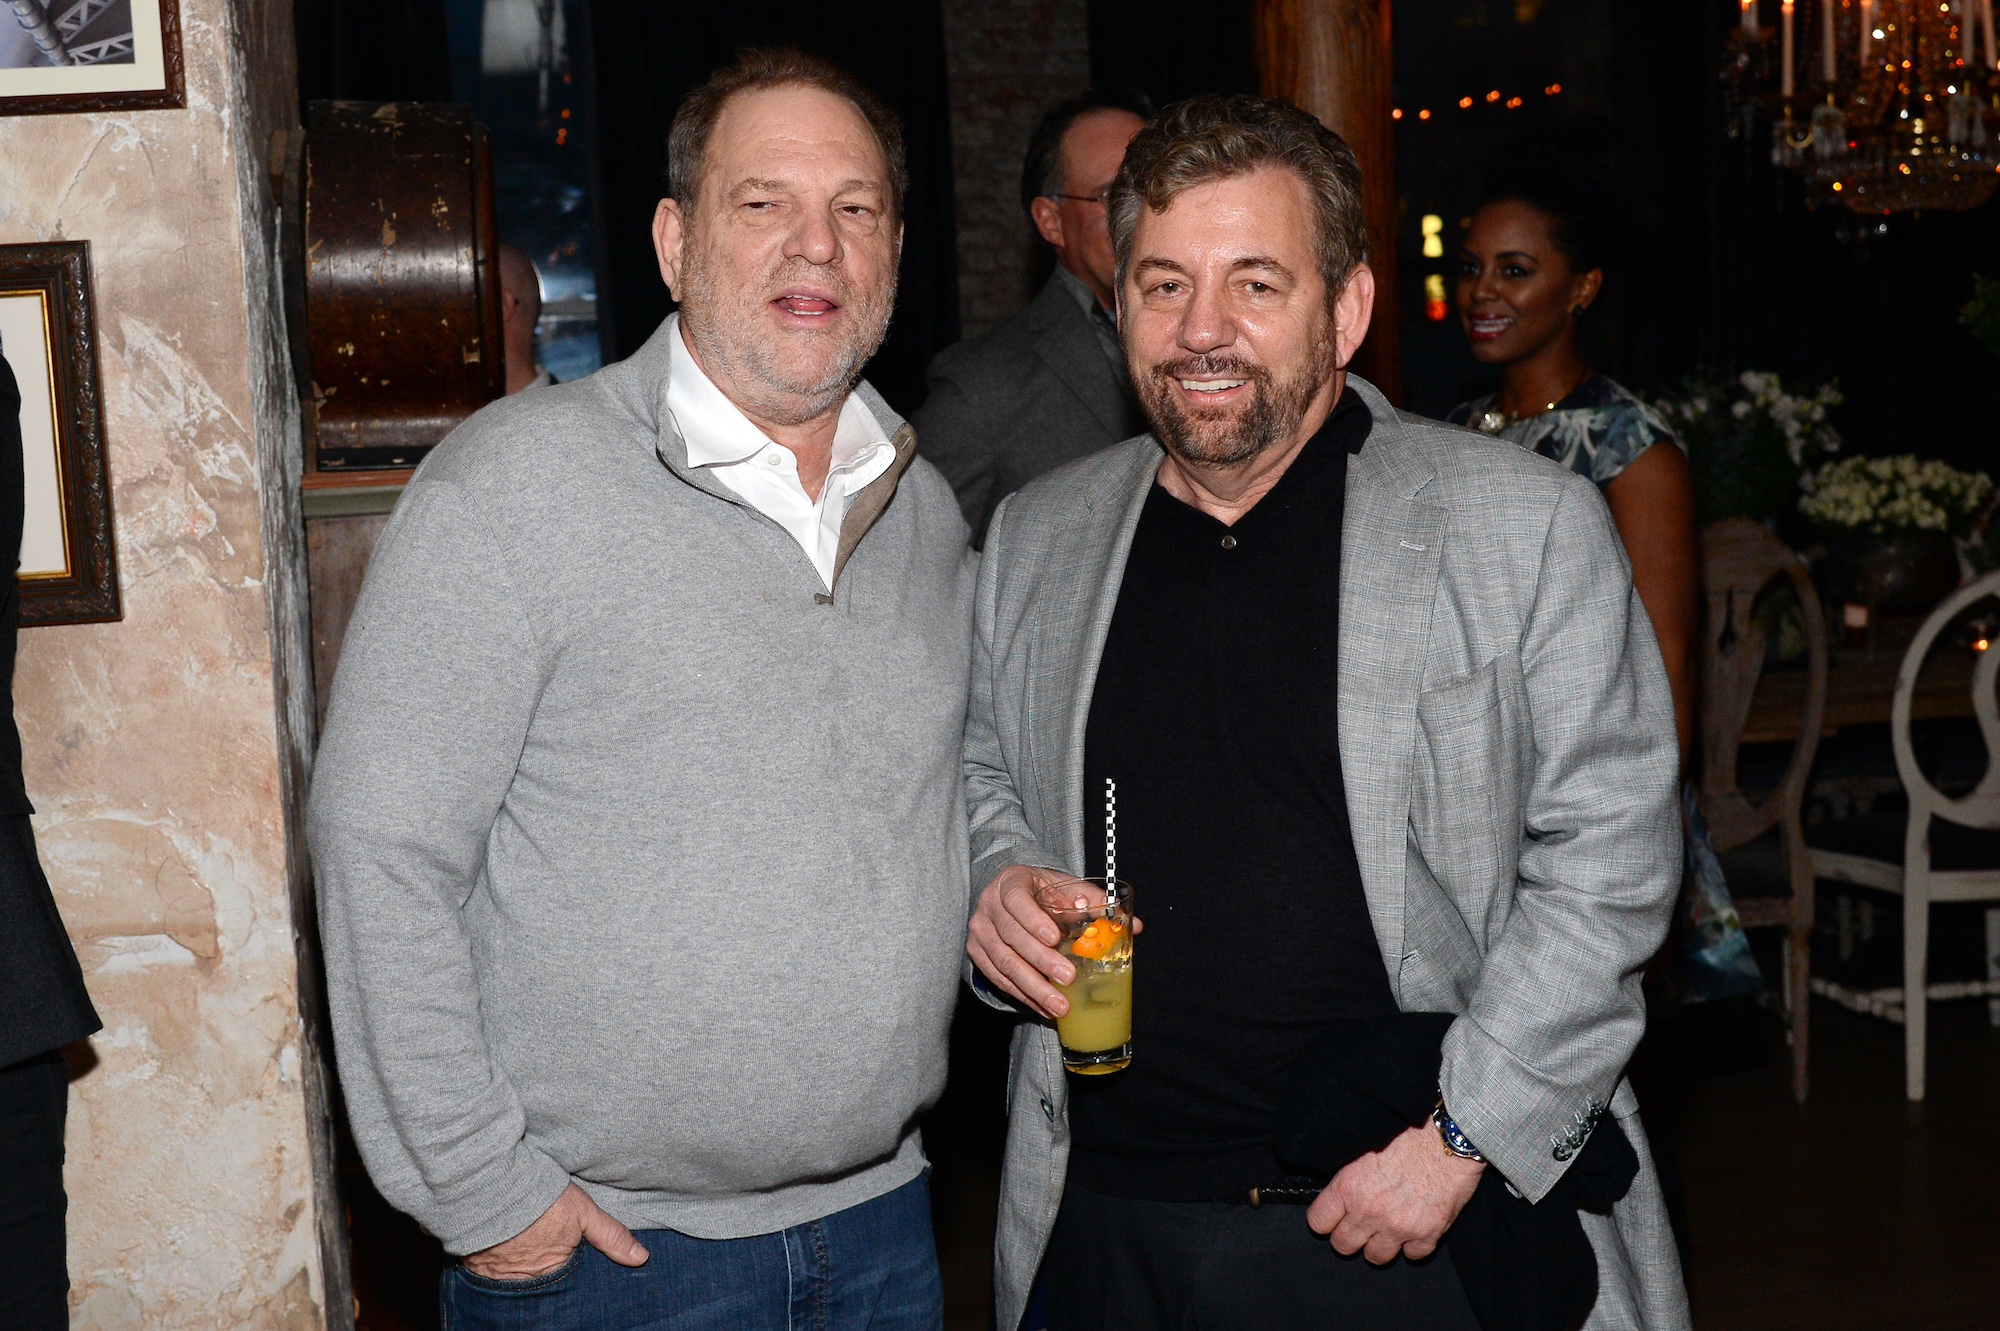 Harvey Weinstein and James Dolan at House of Elyx on December 13, 2015 in New York City. Dolan has a drink in his hand.